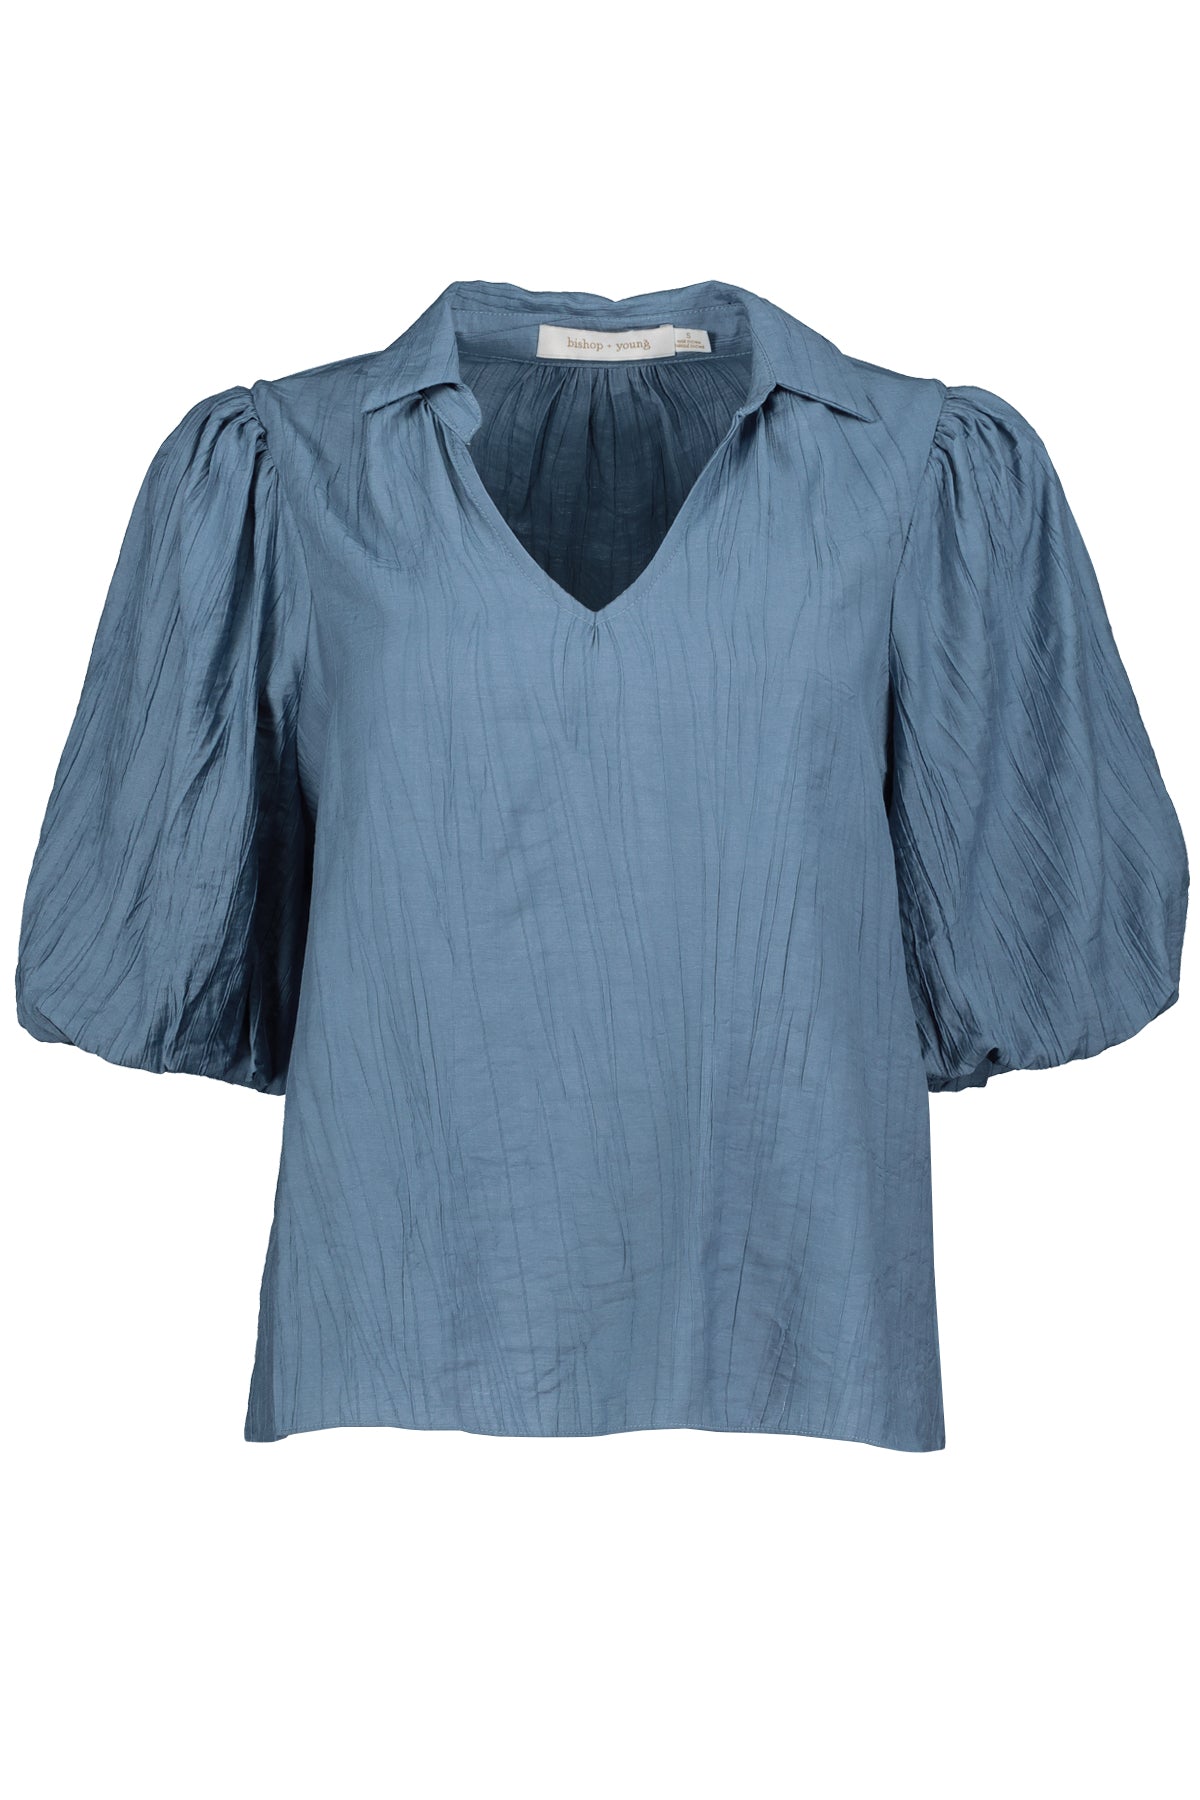 Blanco By Nature Sofia Top Blue - $16 (52% Off Retail) New With